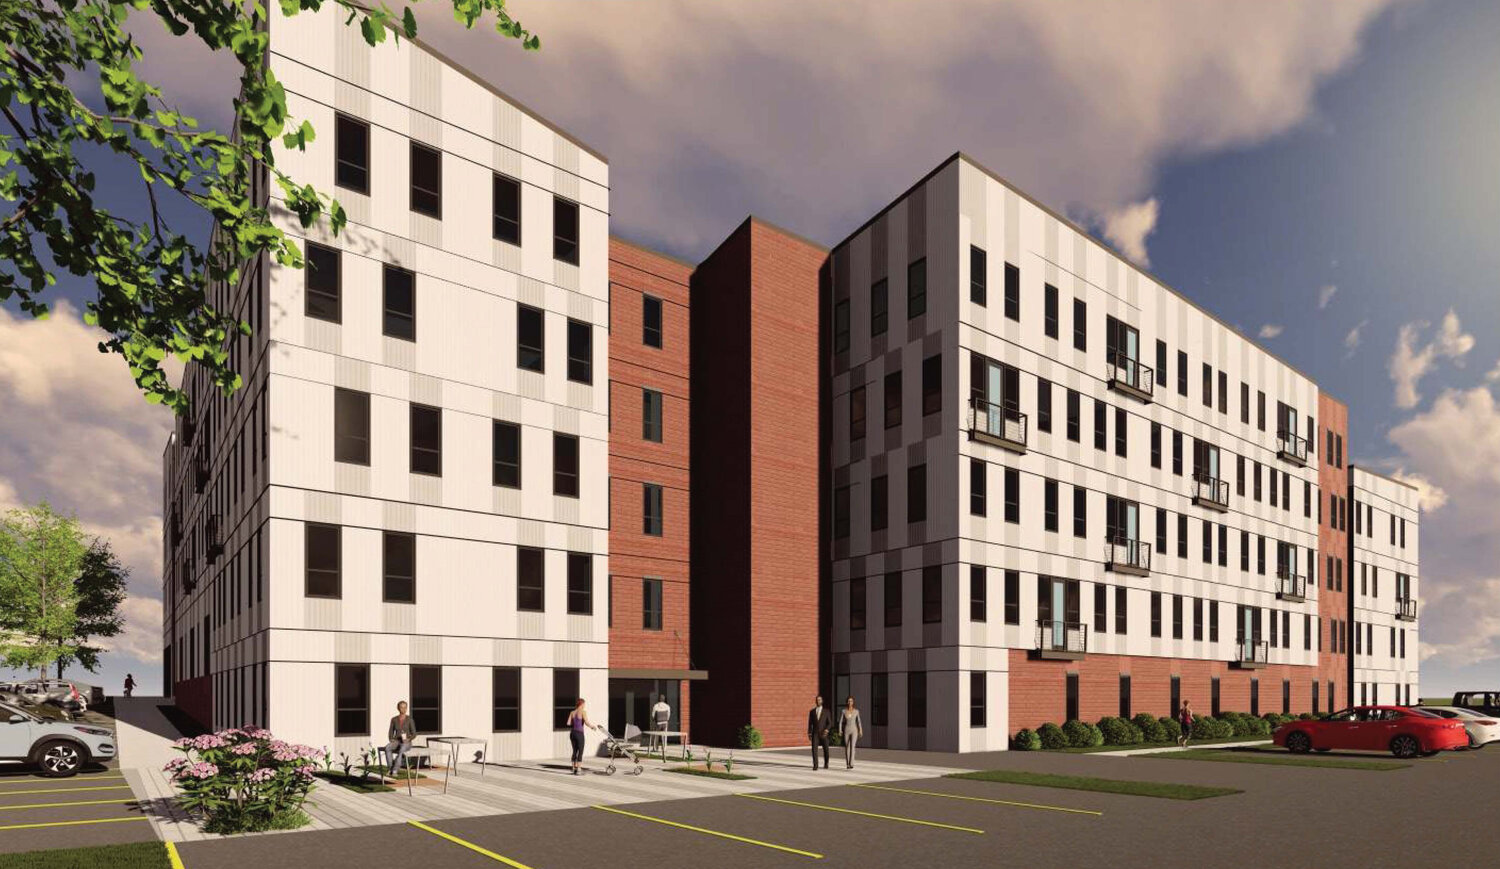 Renderings by Hooker Dejong, a Grand Rapids-based architectural firm, of a mixed-use residential and commercial project that the Lansing Housing Commission is pursuing for downtown Lansing.